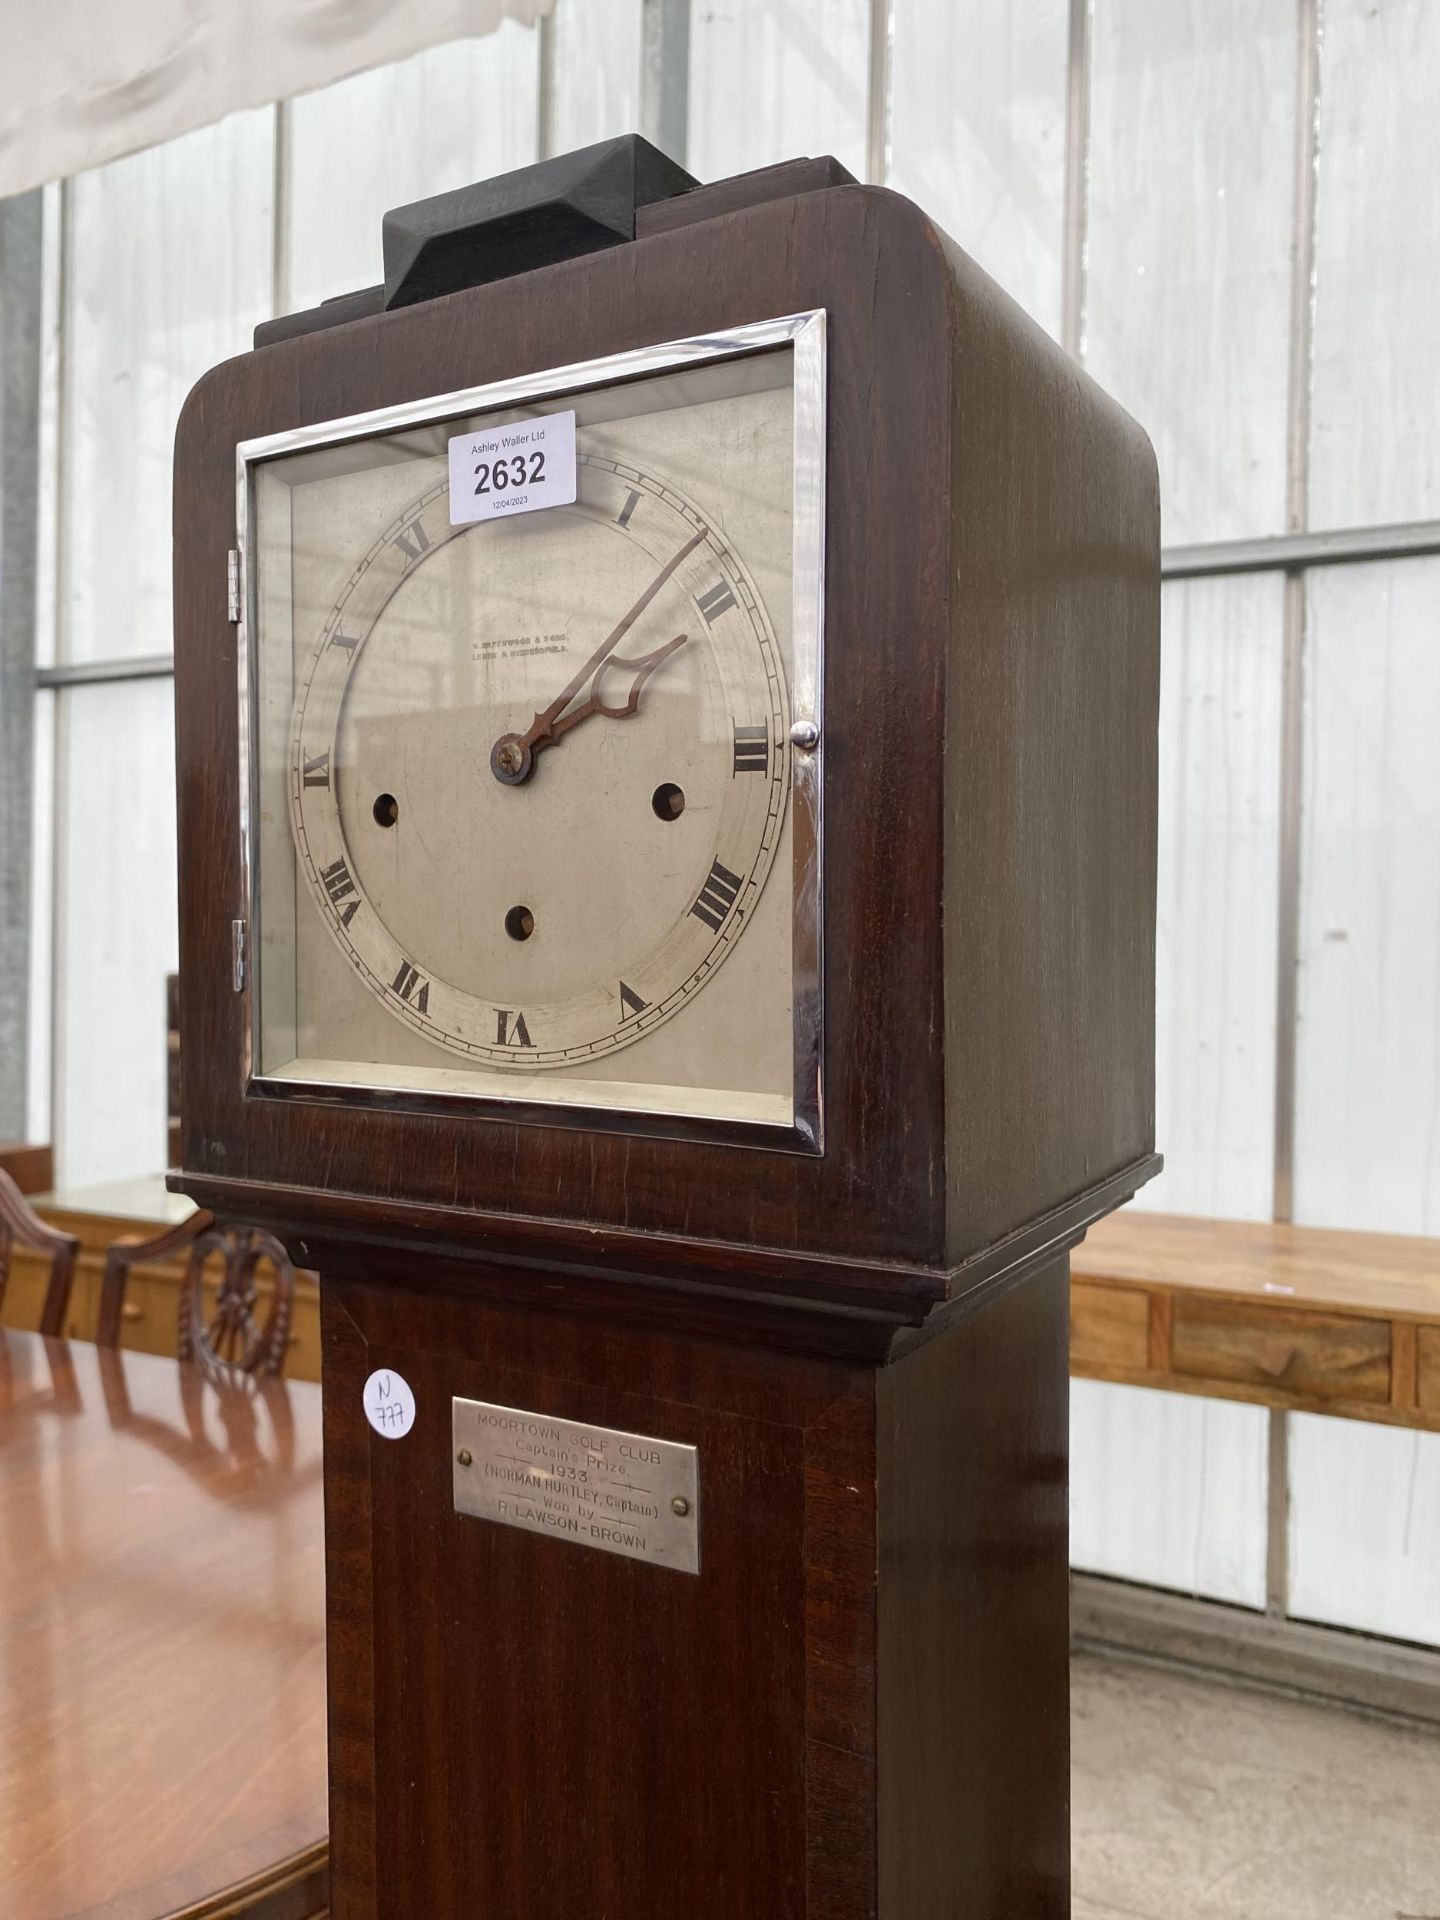 AN EARLY 20TH CENTURY GRANDMOTHER CLOCK BY W.GREENWOOD + SONS, LEEDS + HUDDERSFIELD - Image 2 of 4